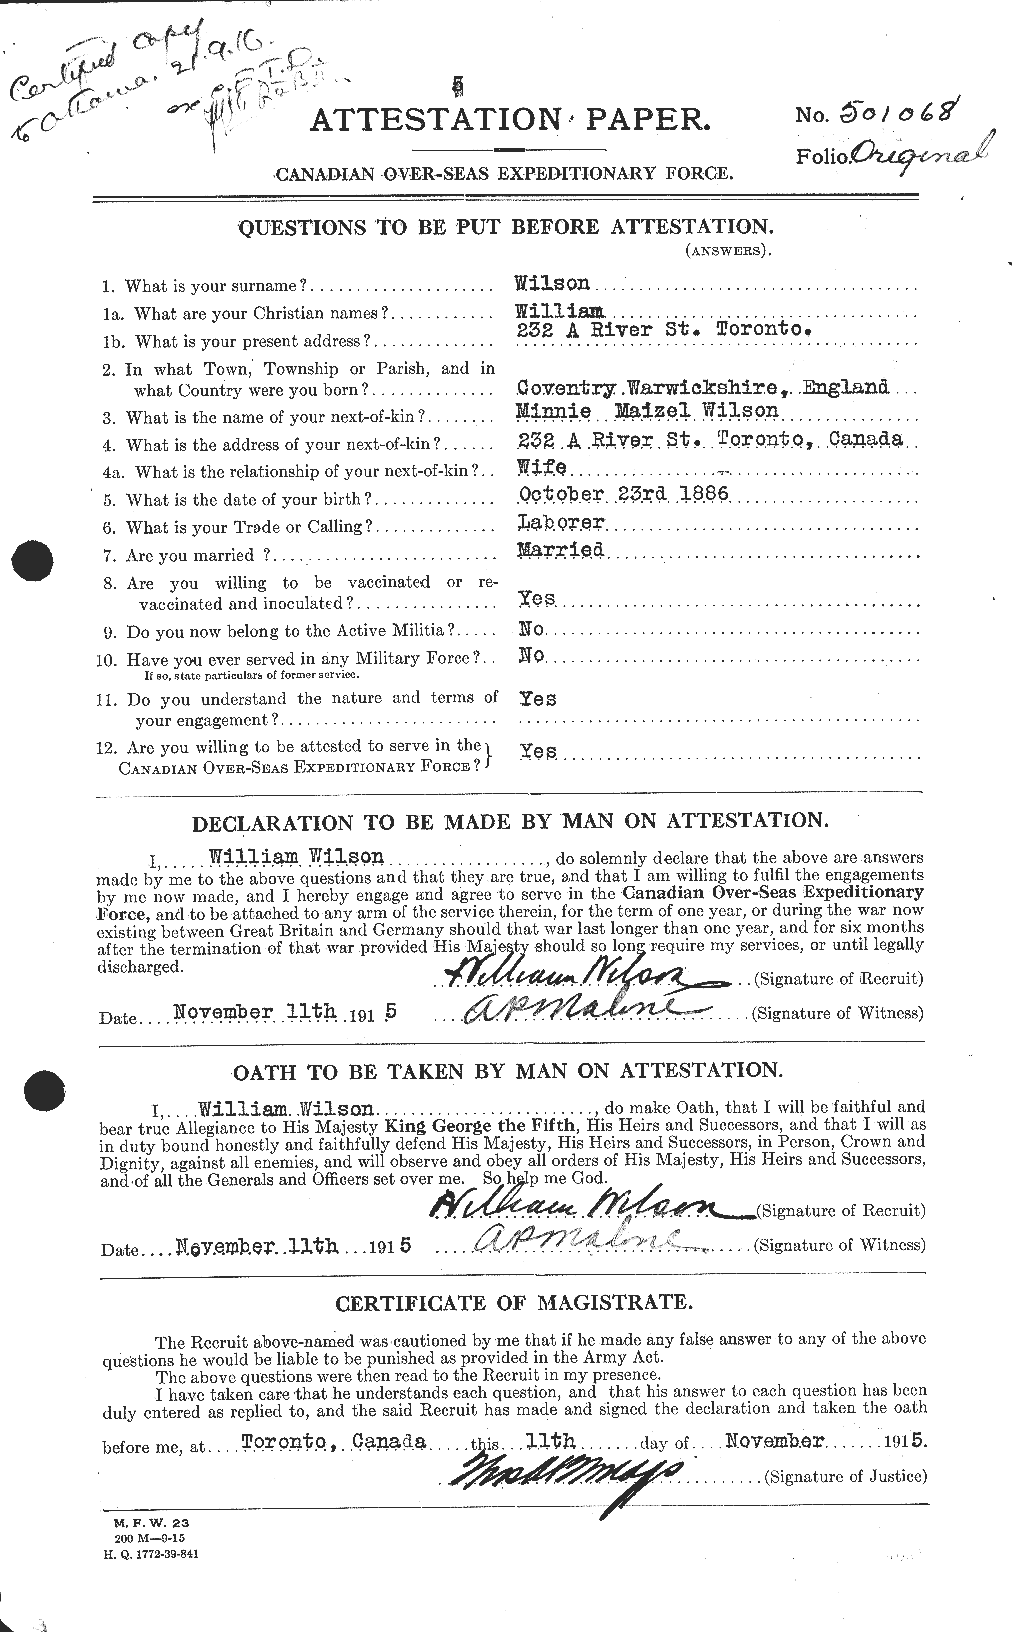 Personnel Records of the First World War - CEF 681908a